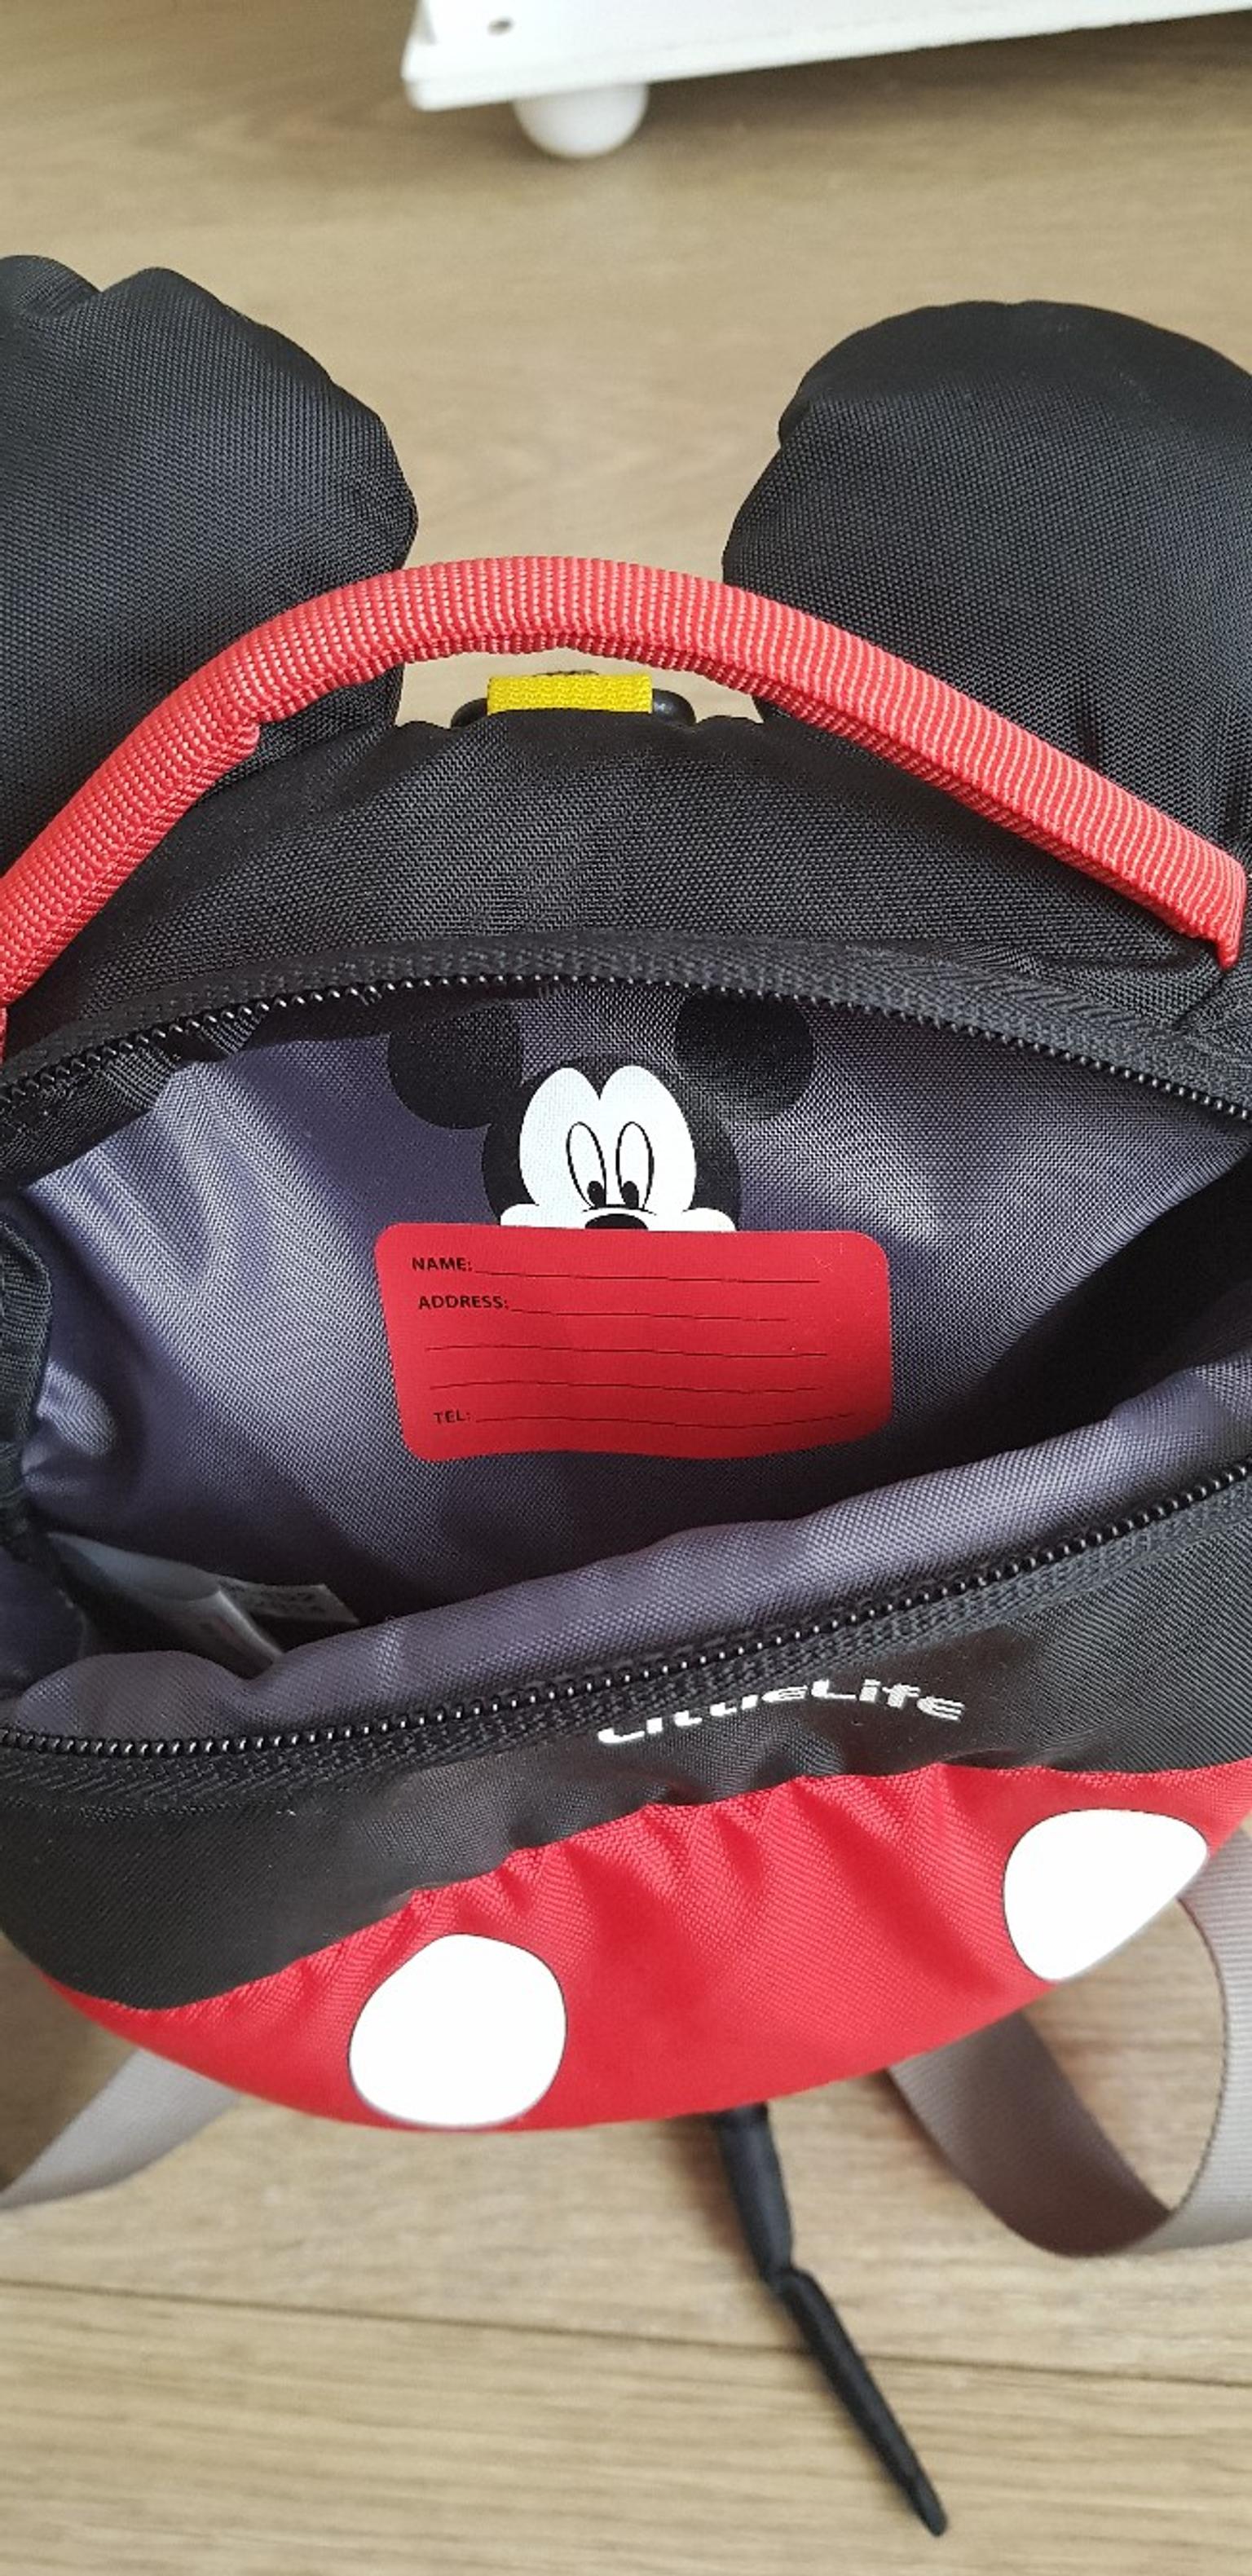 little life backpack mickey mouse